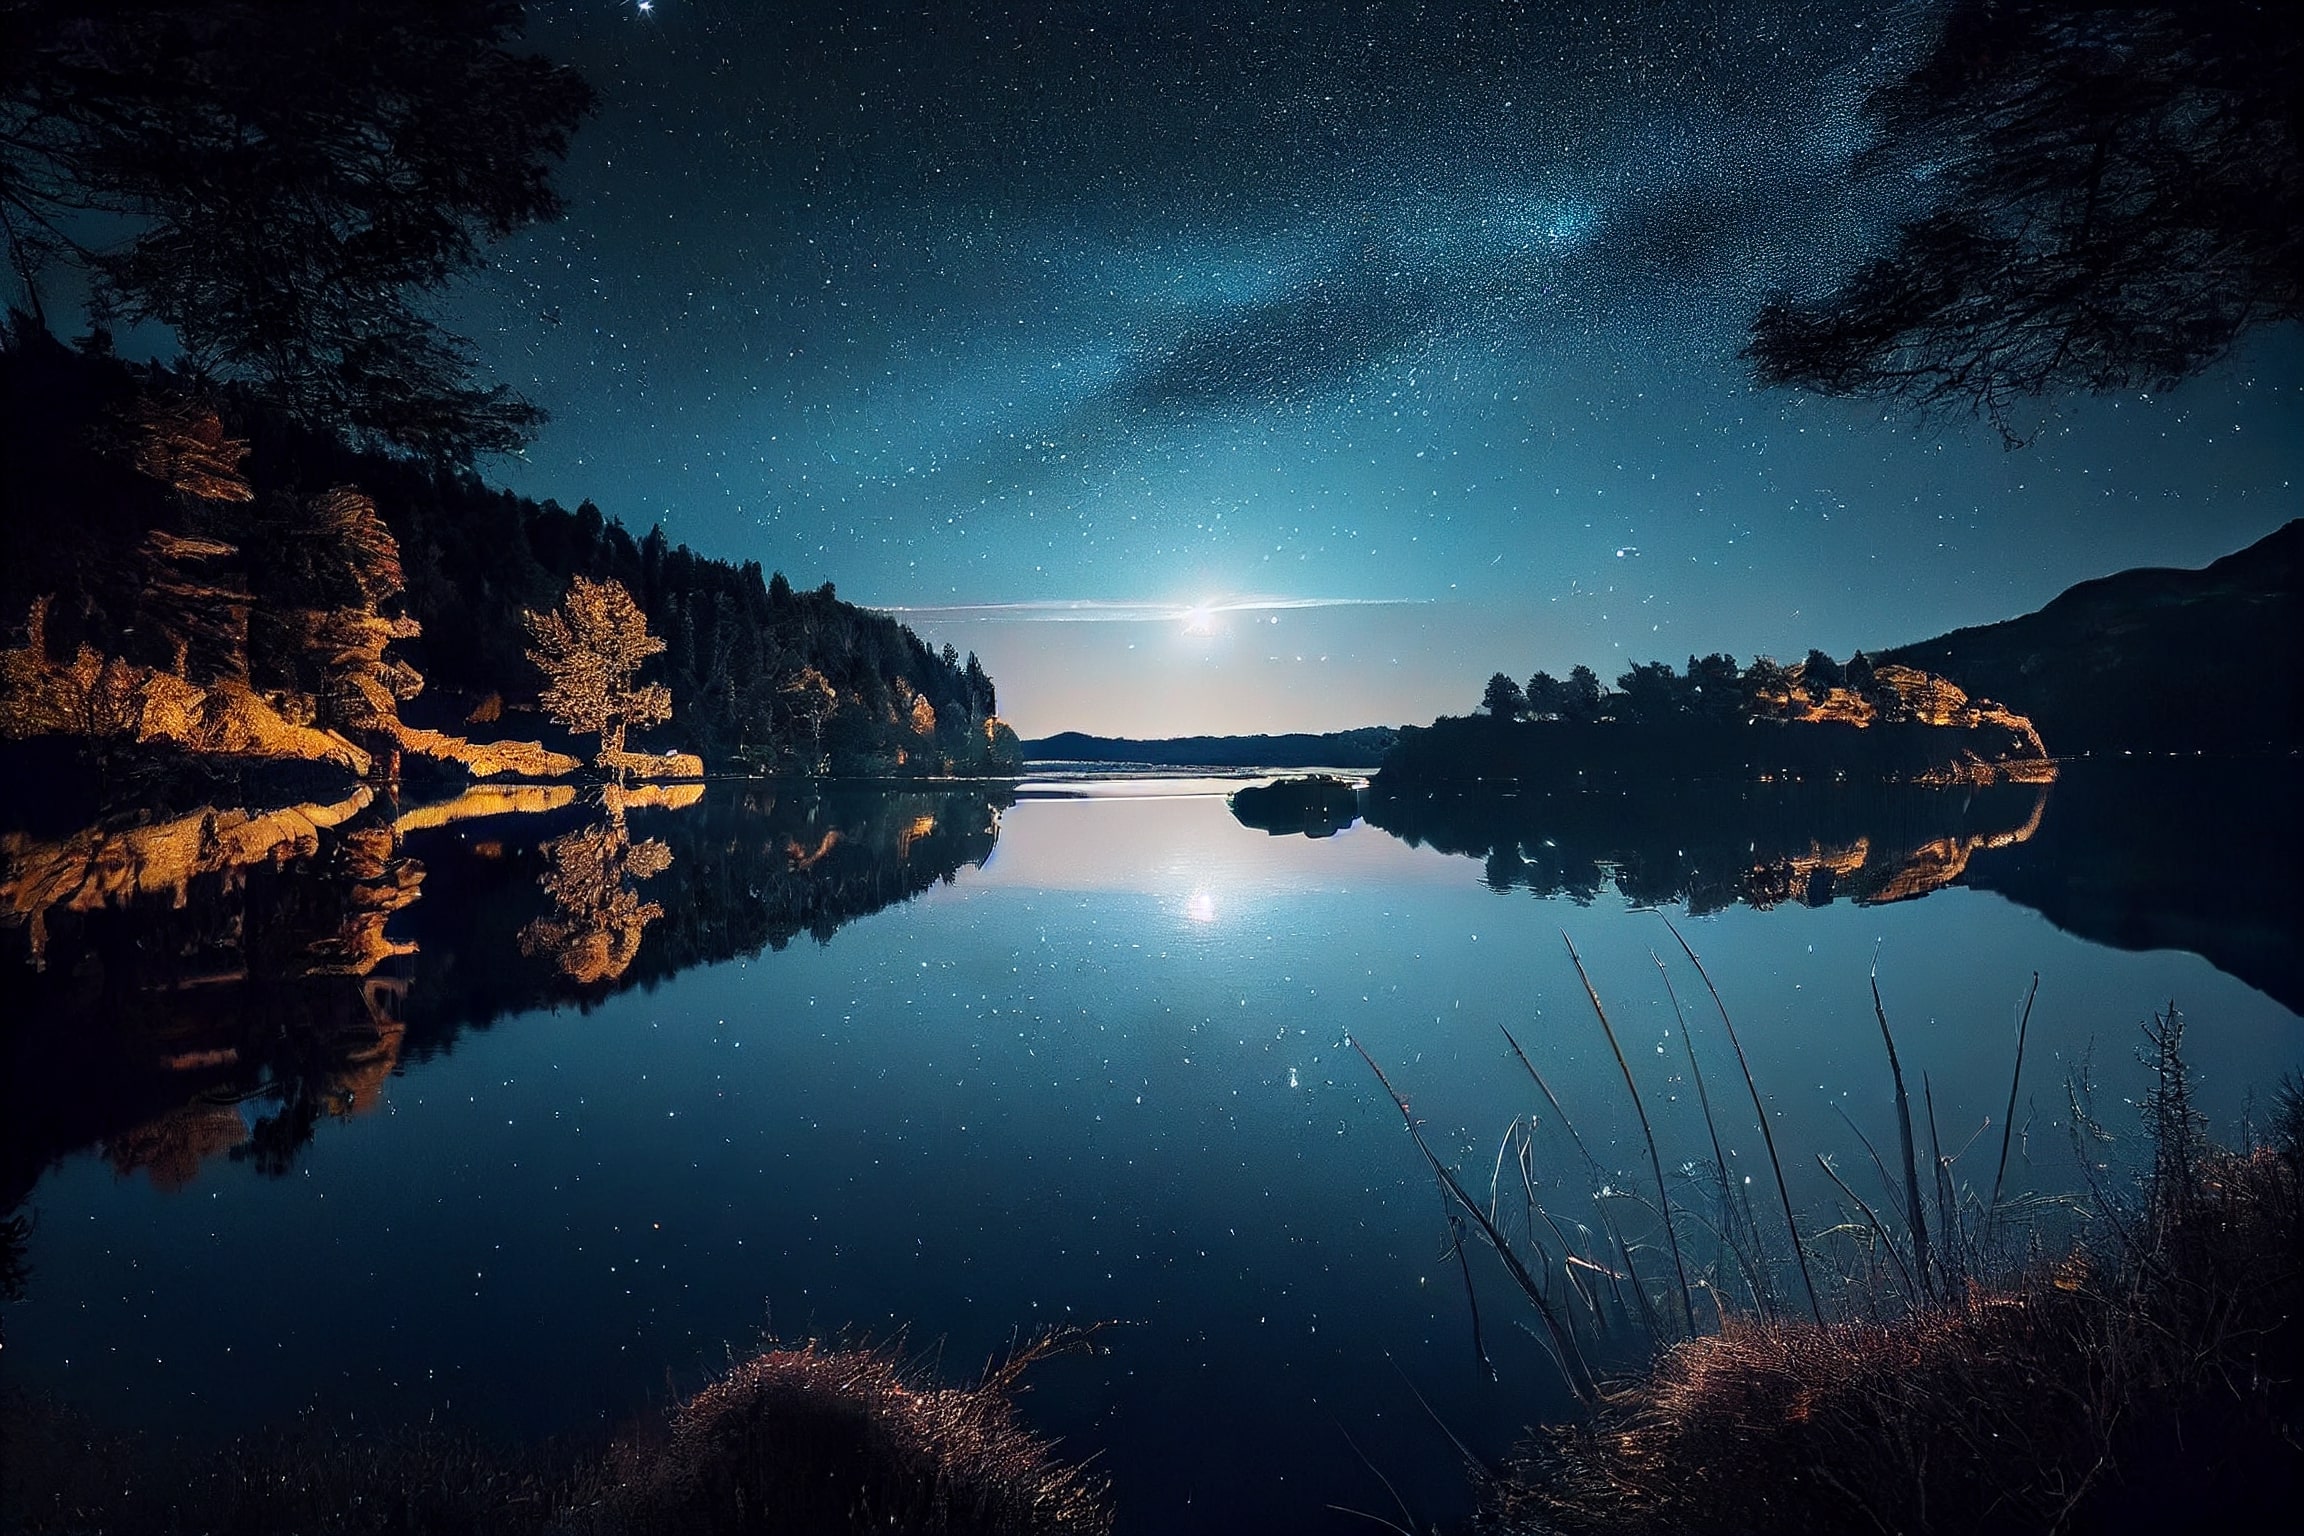 The night sky is reflected in the still water of a lake.